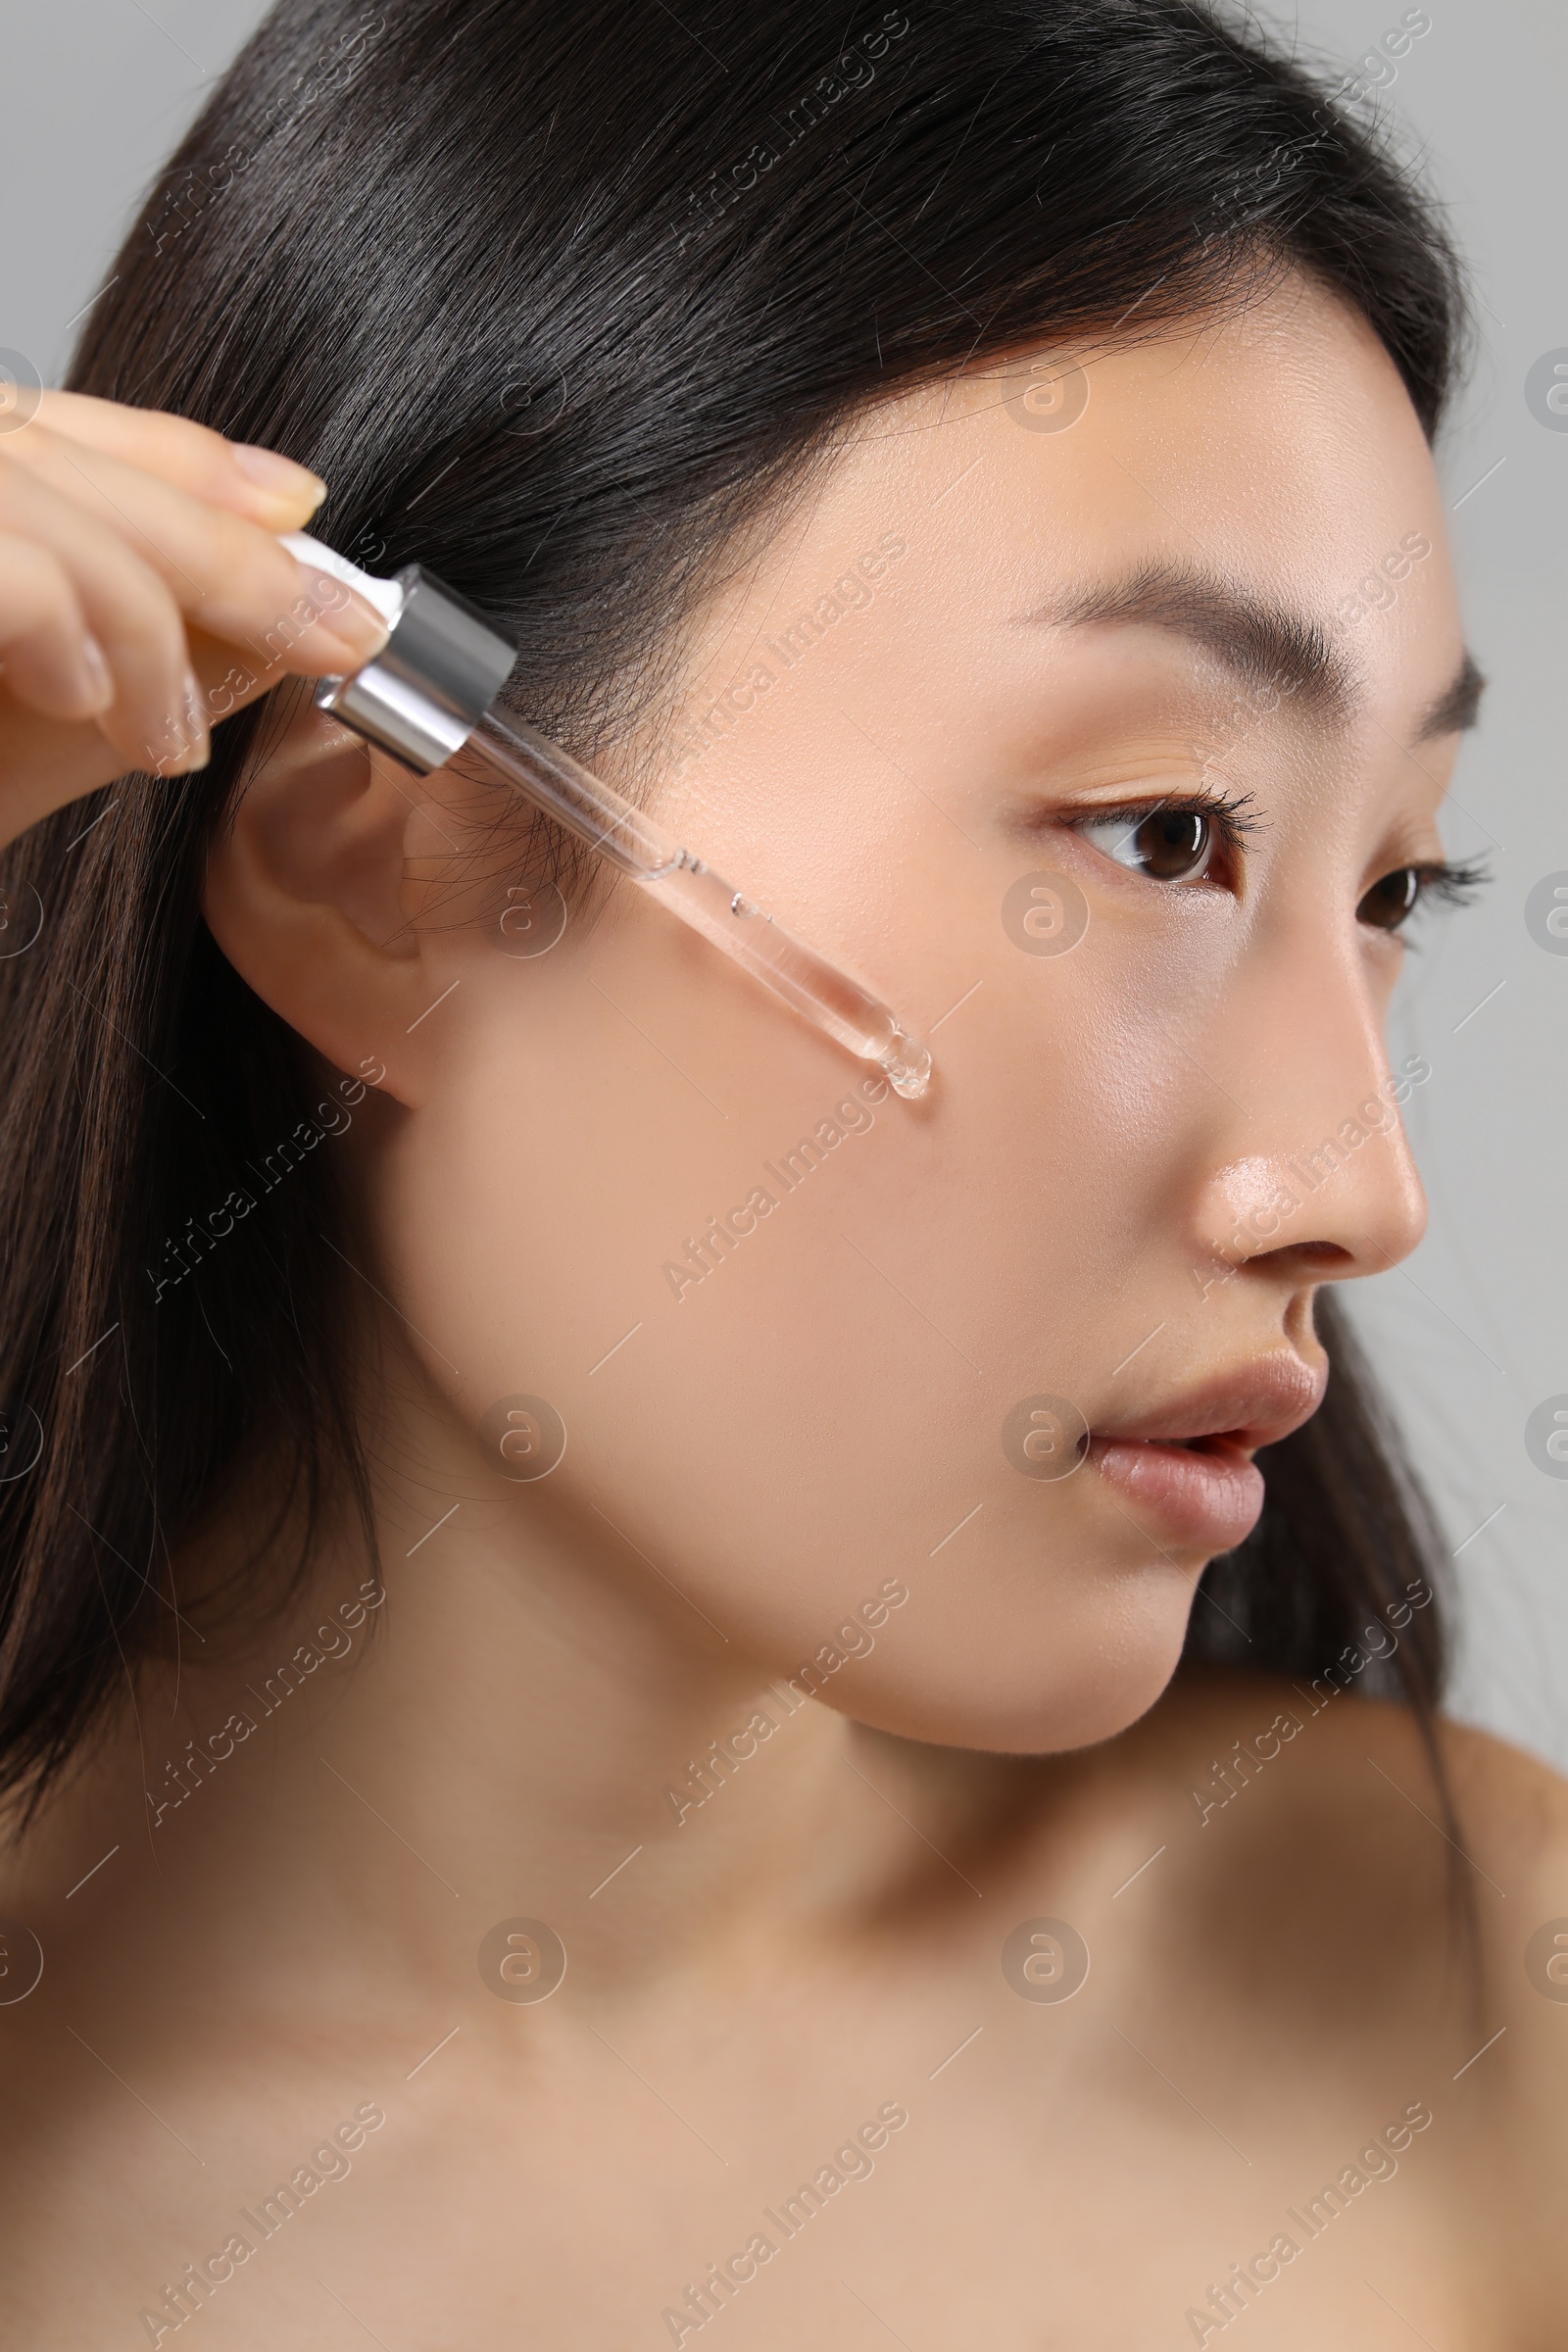 Photo of Beautiful young woman applying cosmetic serum onto her face on grey background, closeup